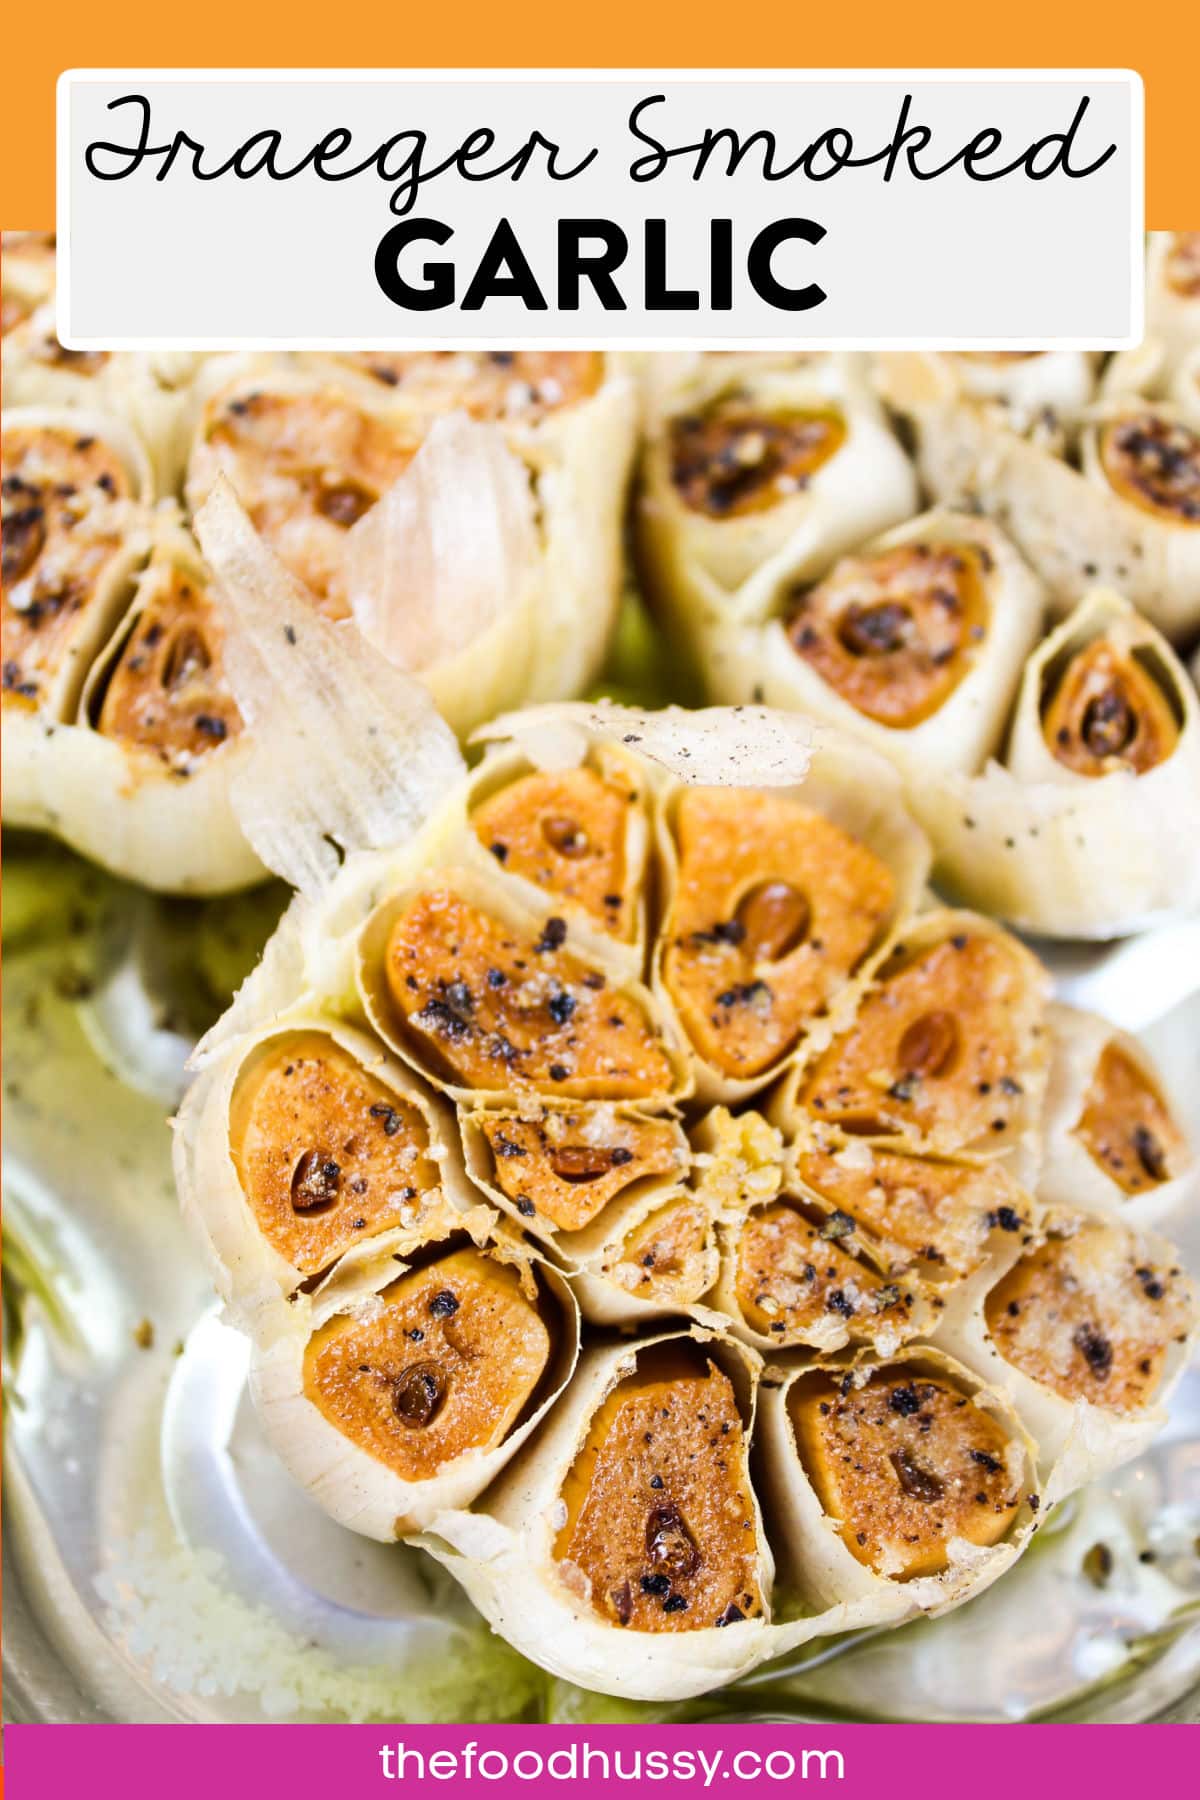 Roasted Garlic is great - but Smoked Garlic takes it to the next level! Smoking gets the garlic soft and smooth, with a mellow flavor - but also adds that touch of smoke that any smoker fan will love!  via @foodhussy